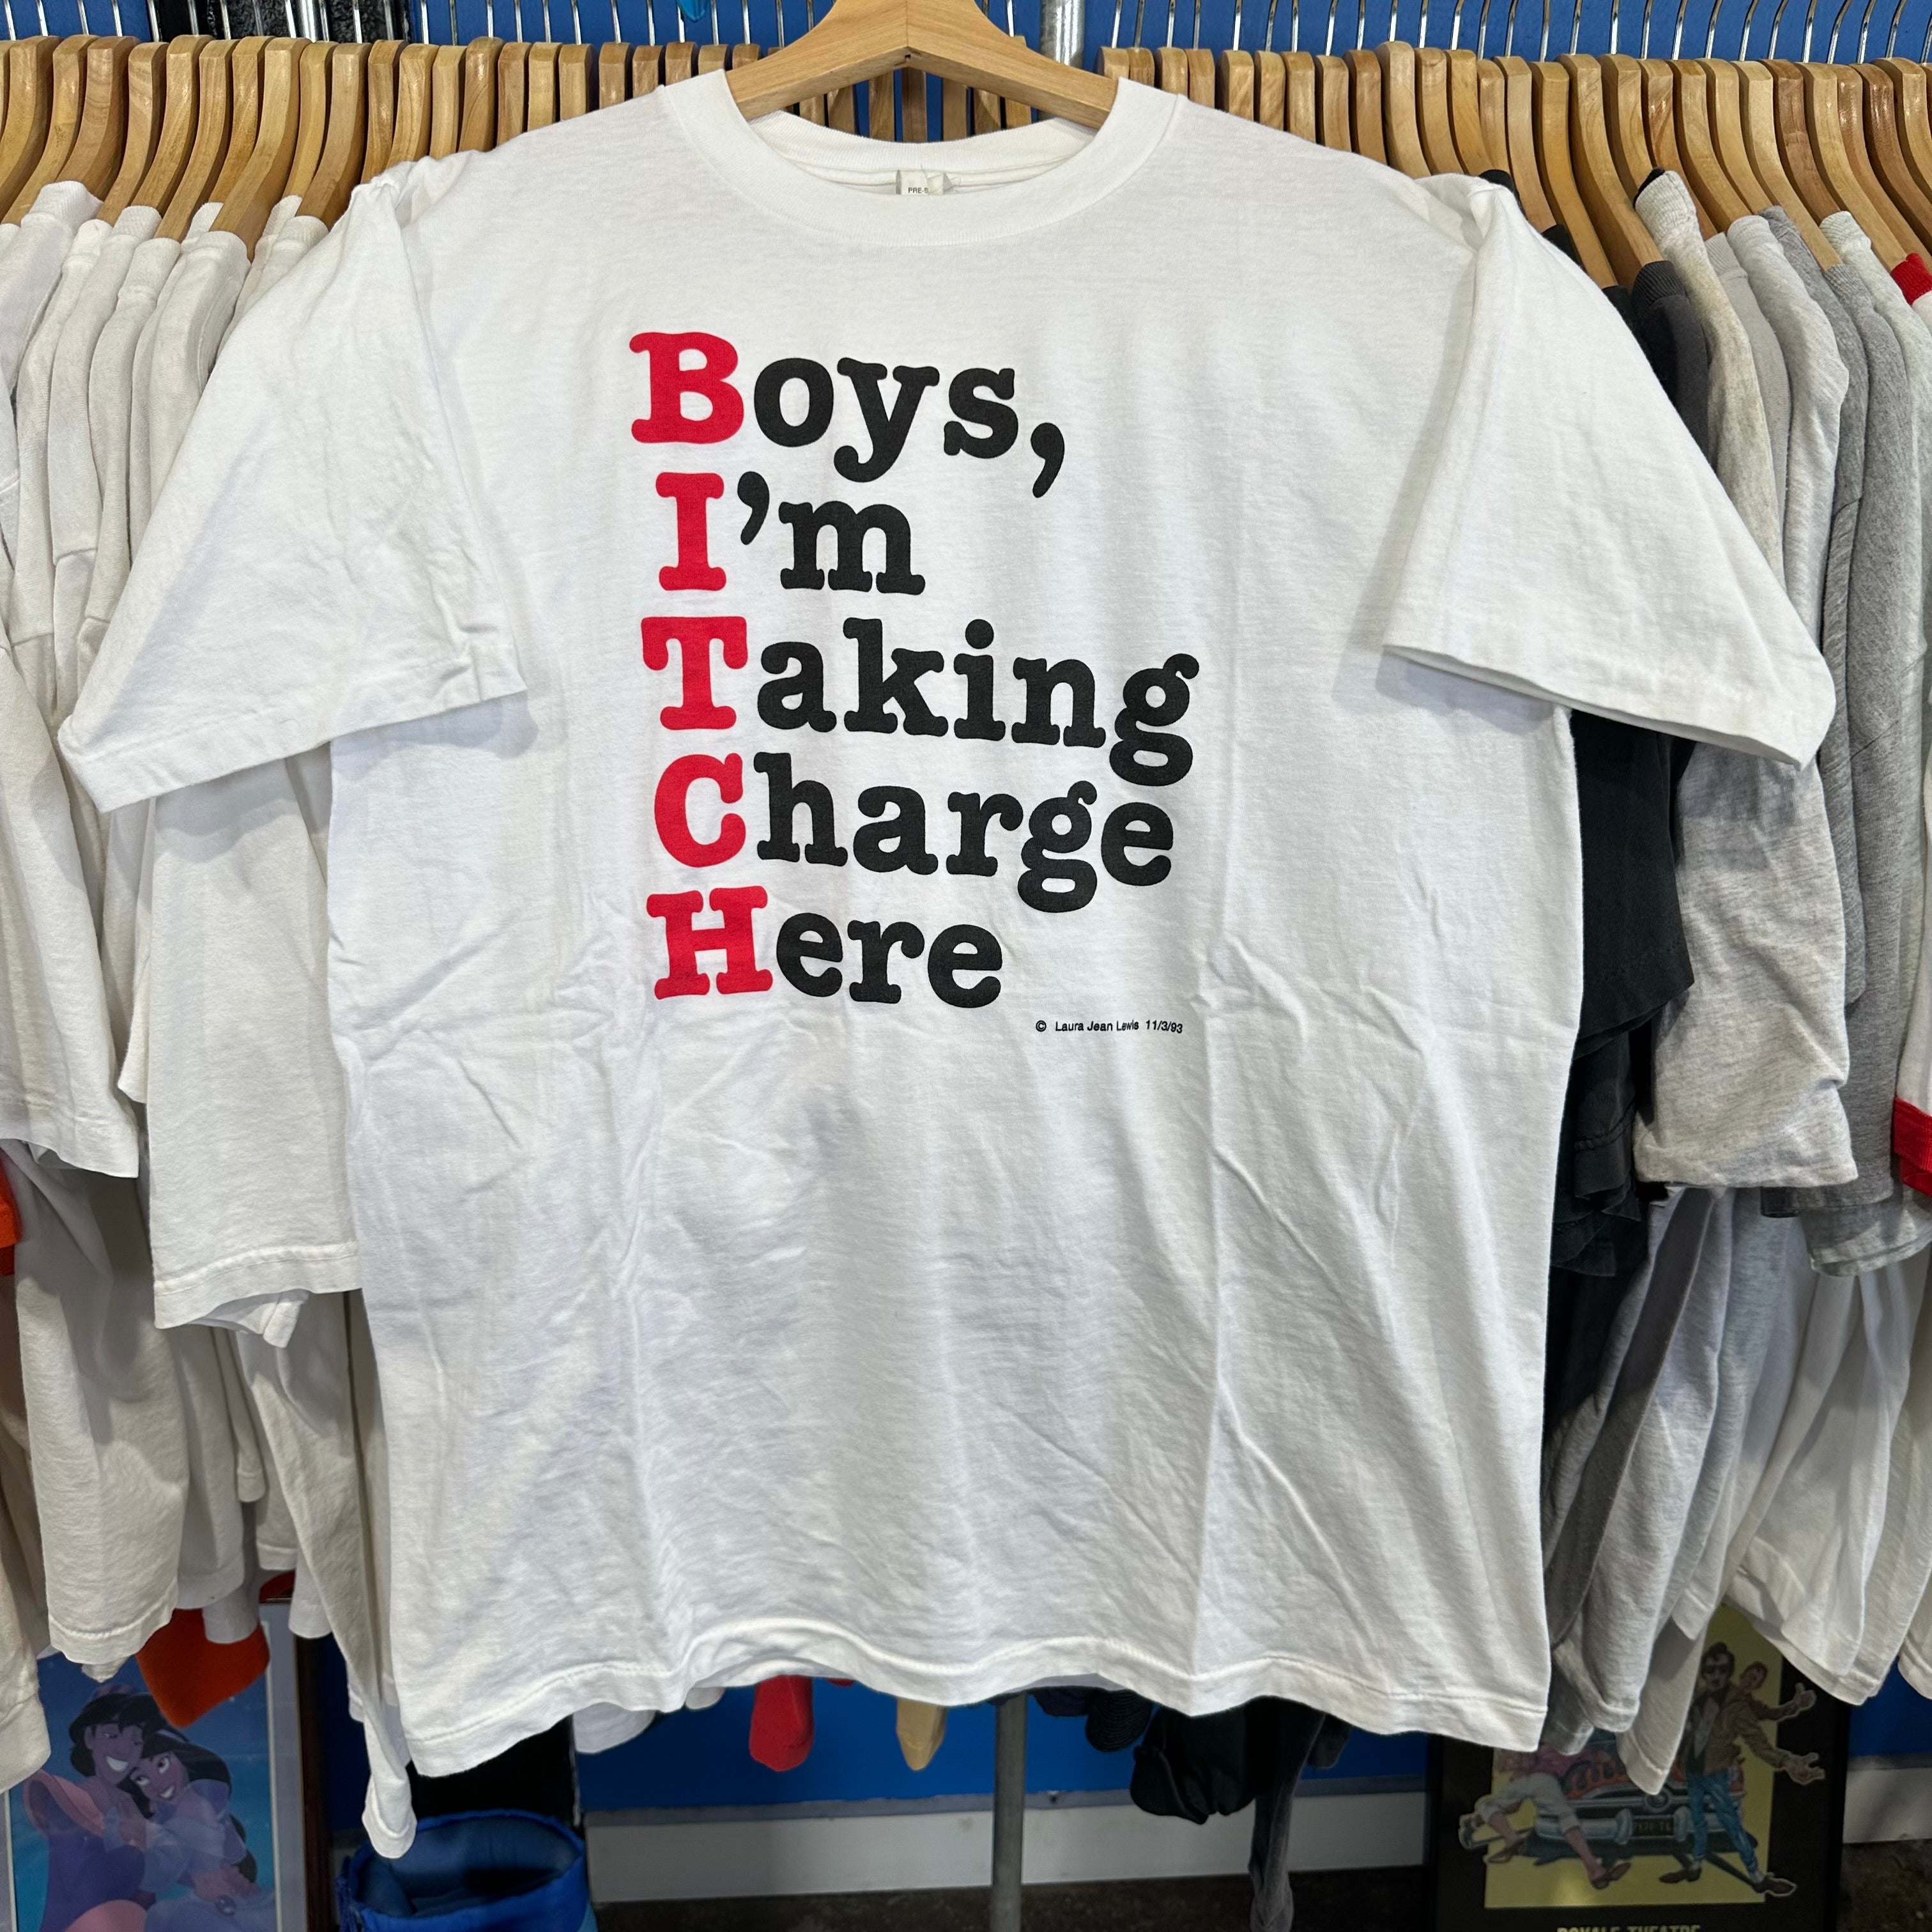 Boys, I’m Taking Charge Here T-Shirt